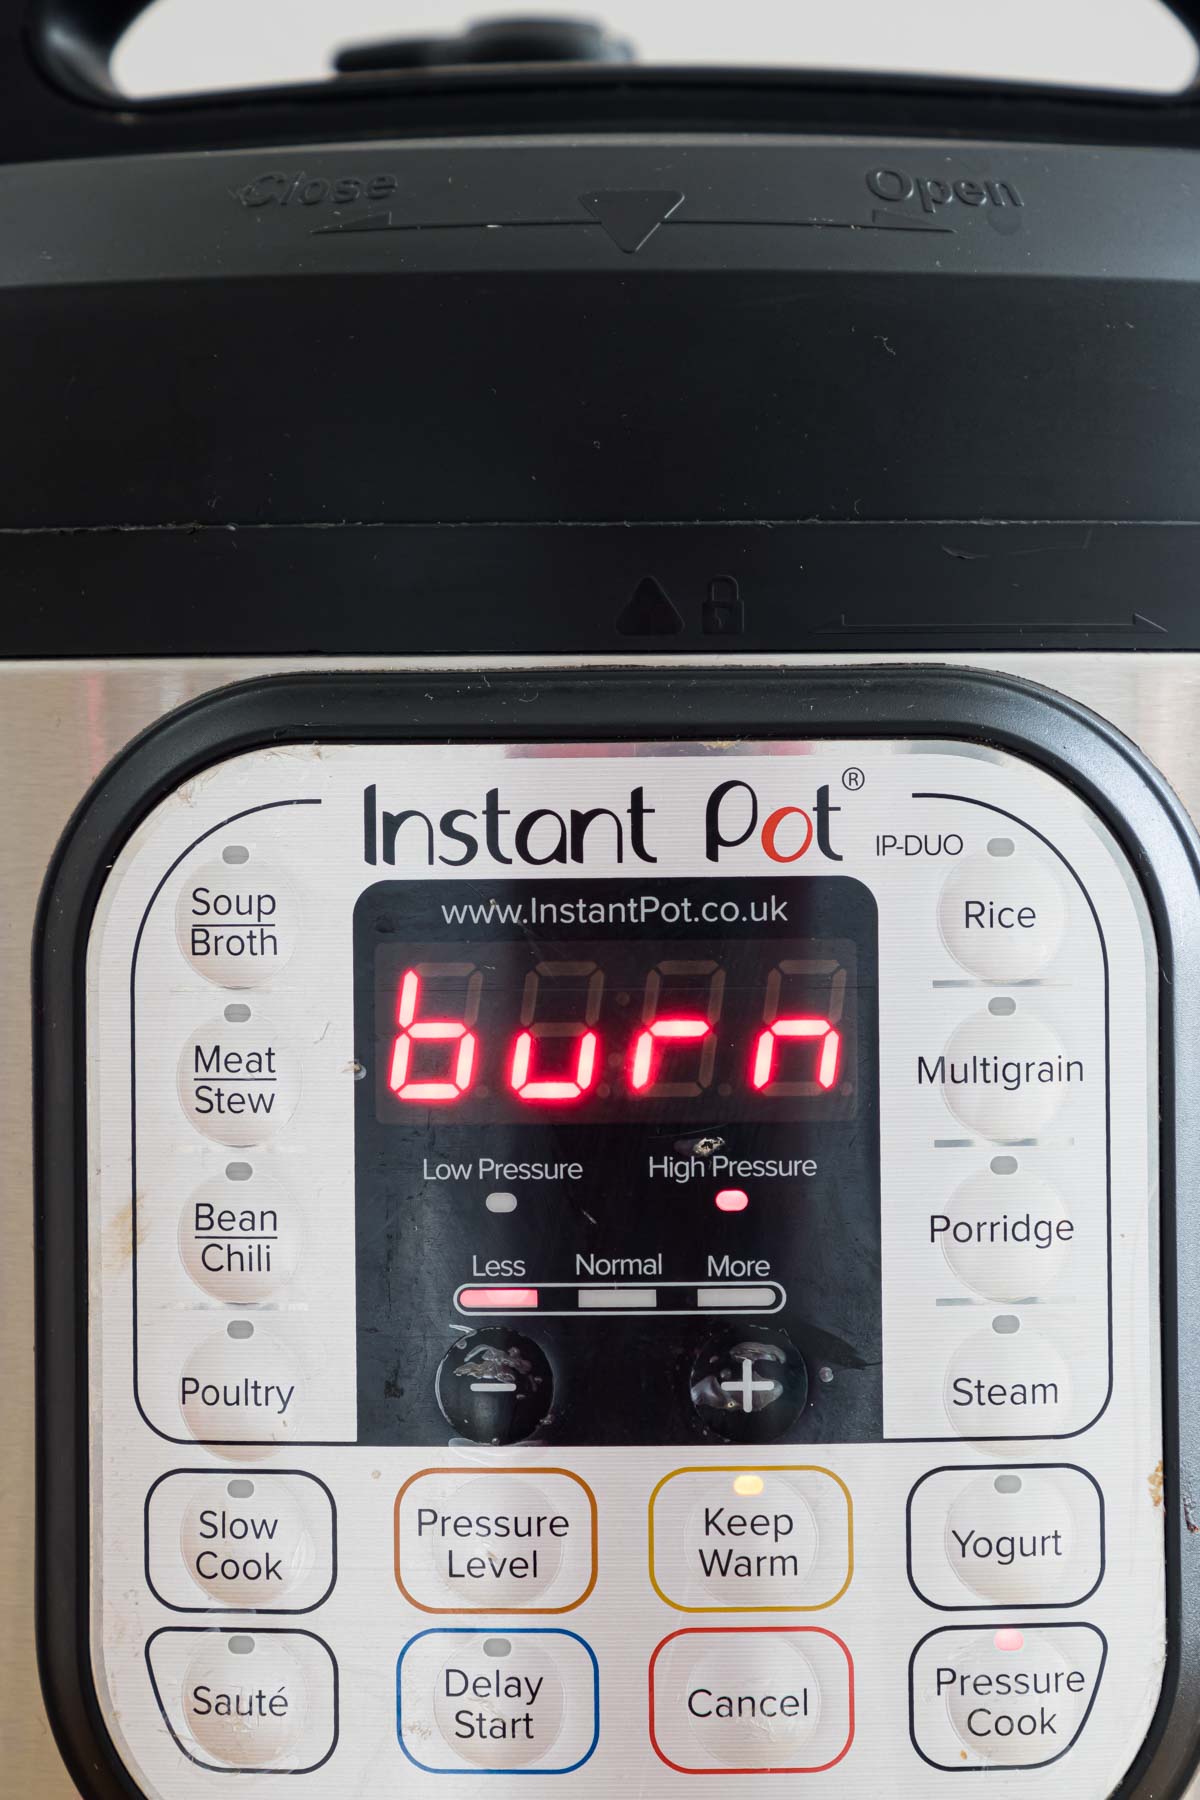 close up view of the instant pot burn message